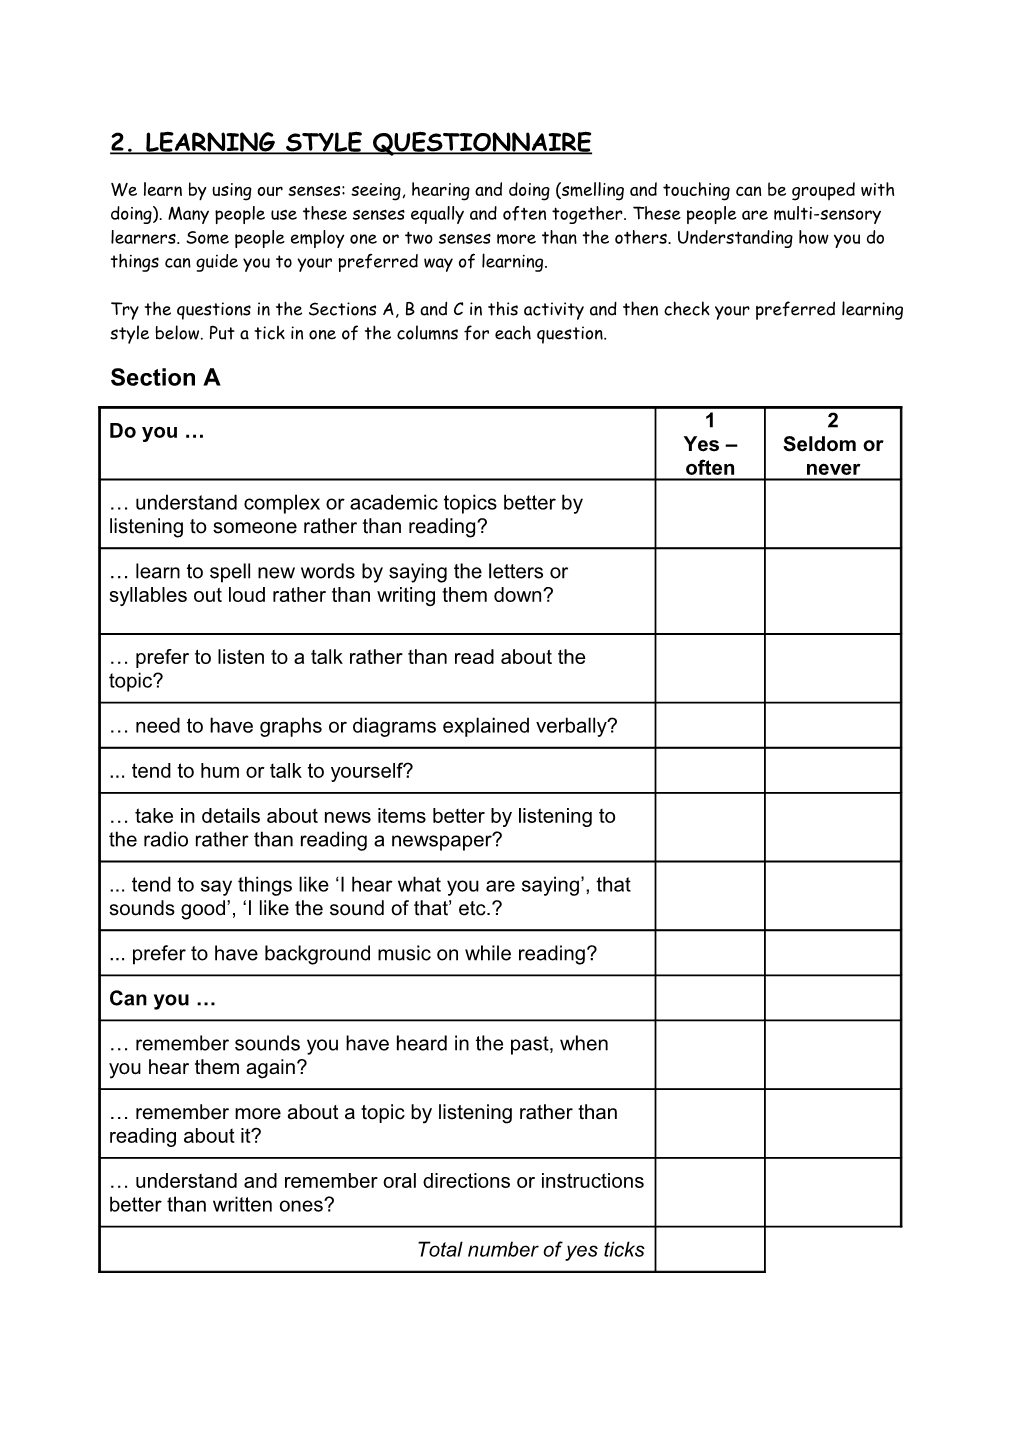 2. Learning Style Questionnaire